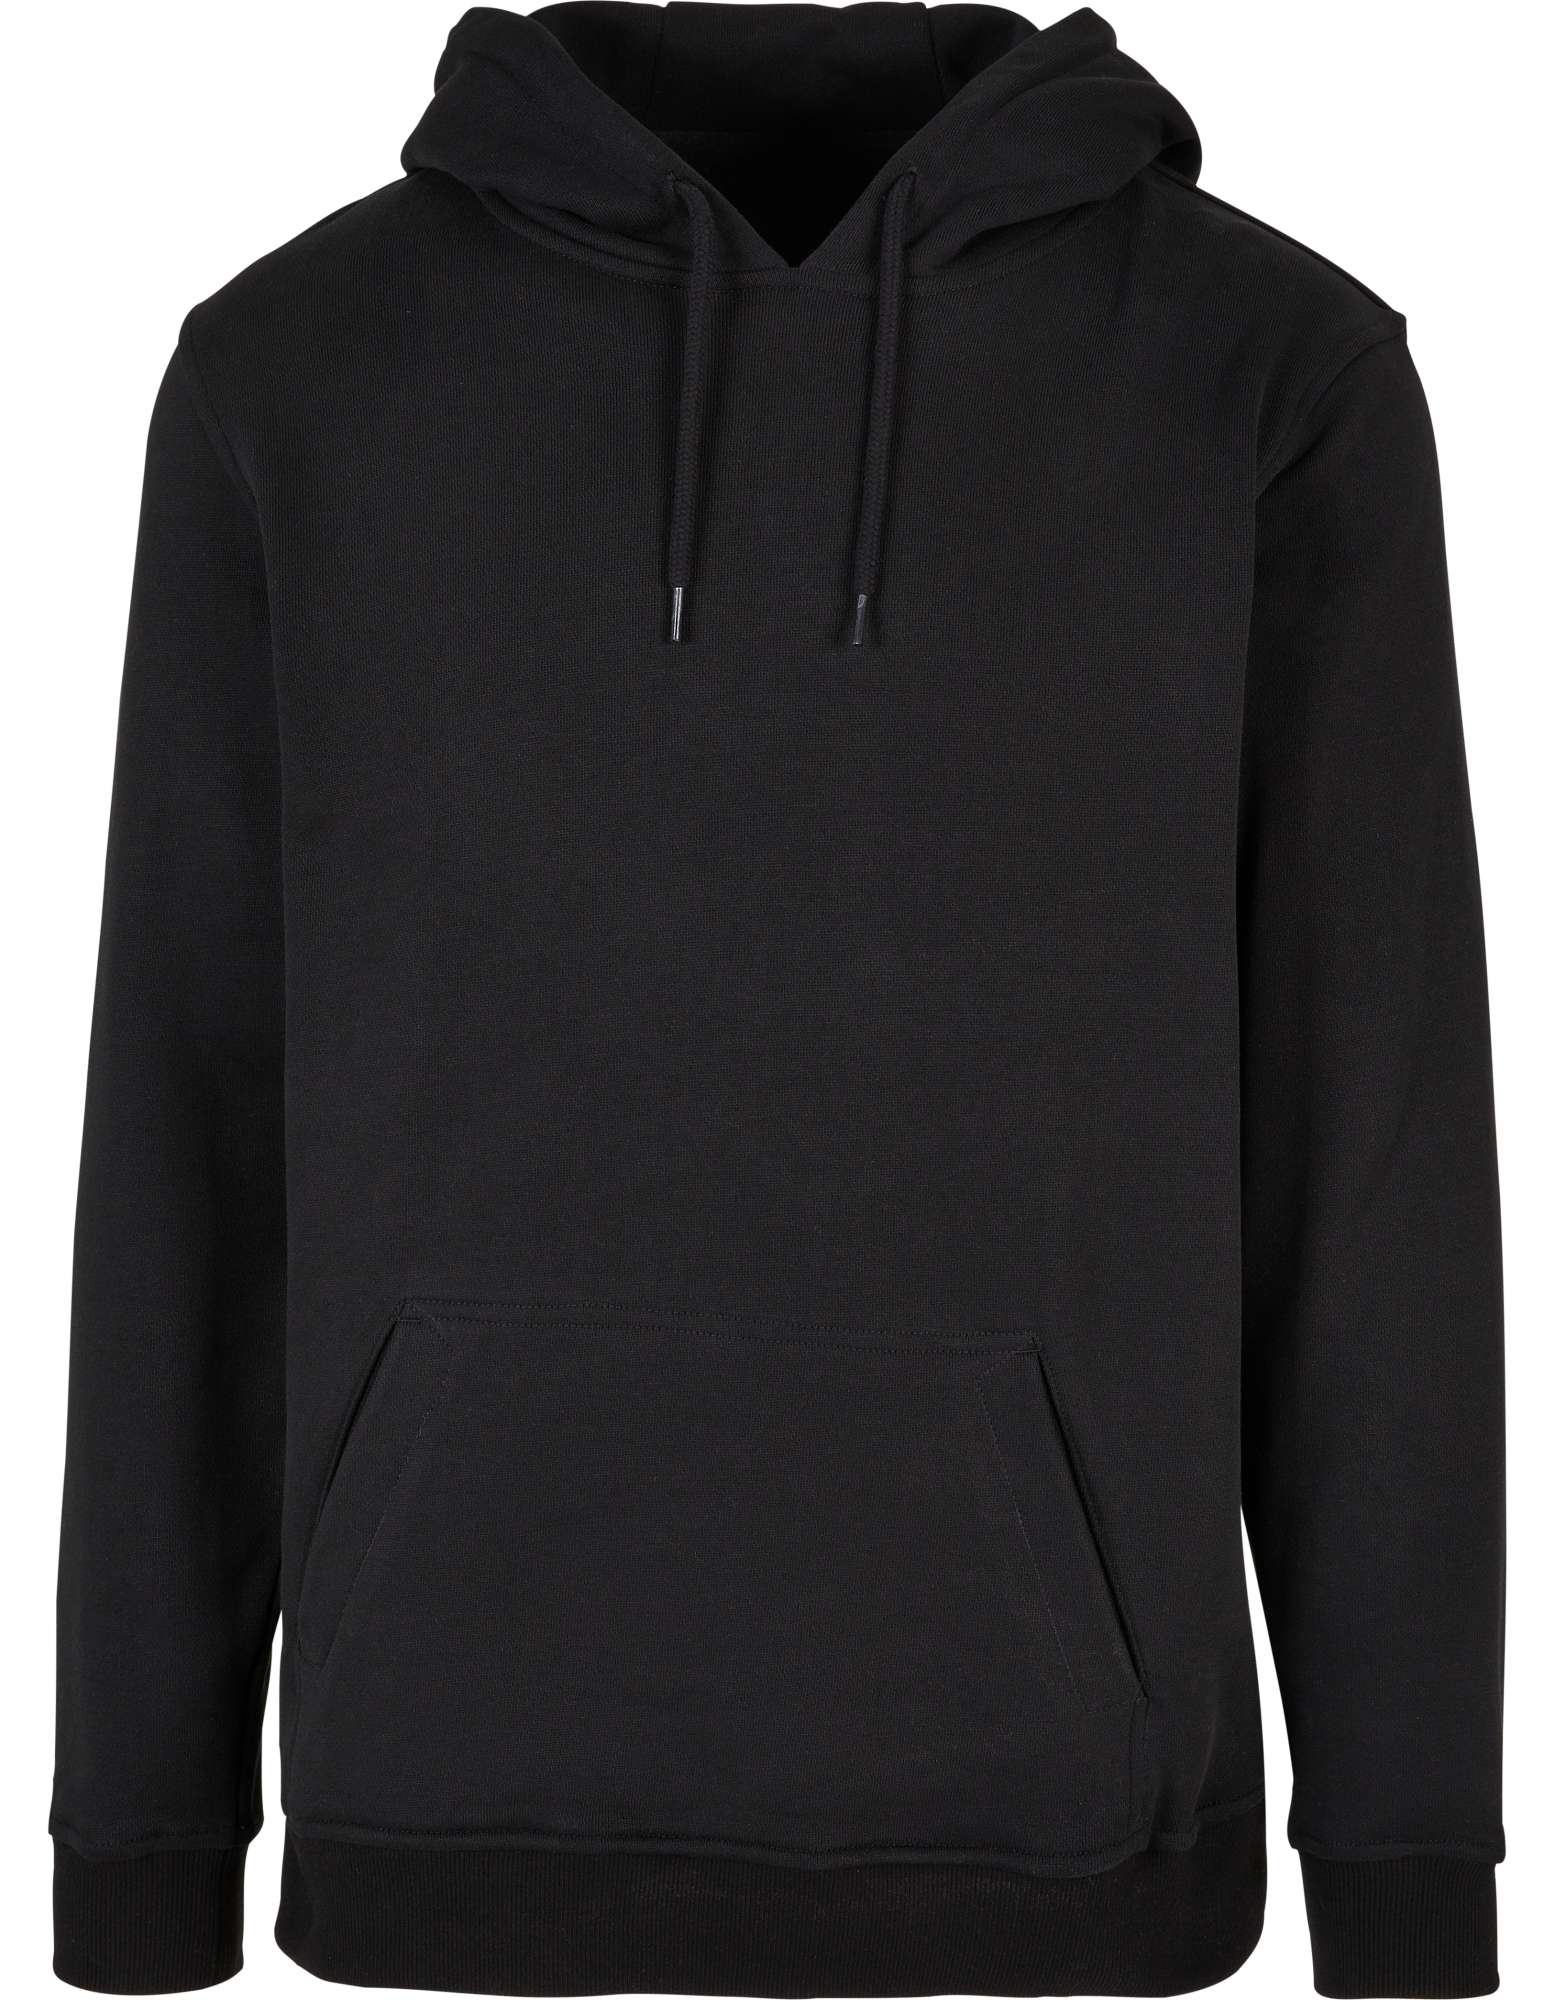 Build Your Brand Ultra Heavy Regular Hoody Black L (BY215)